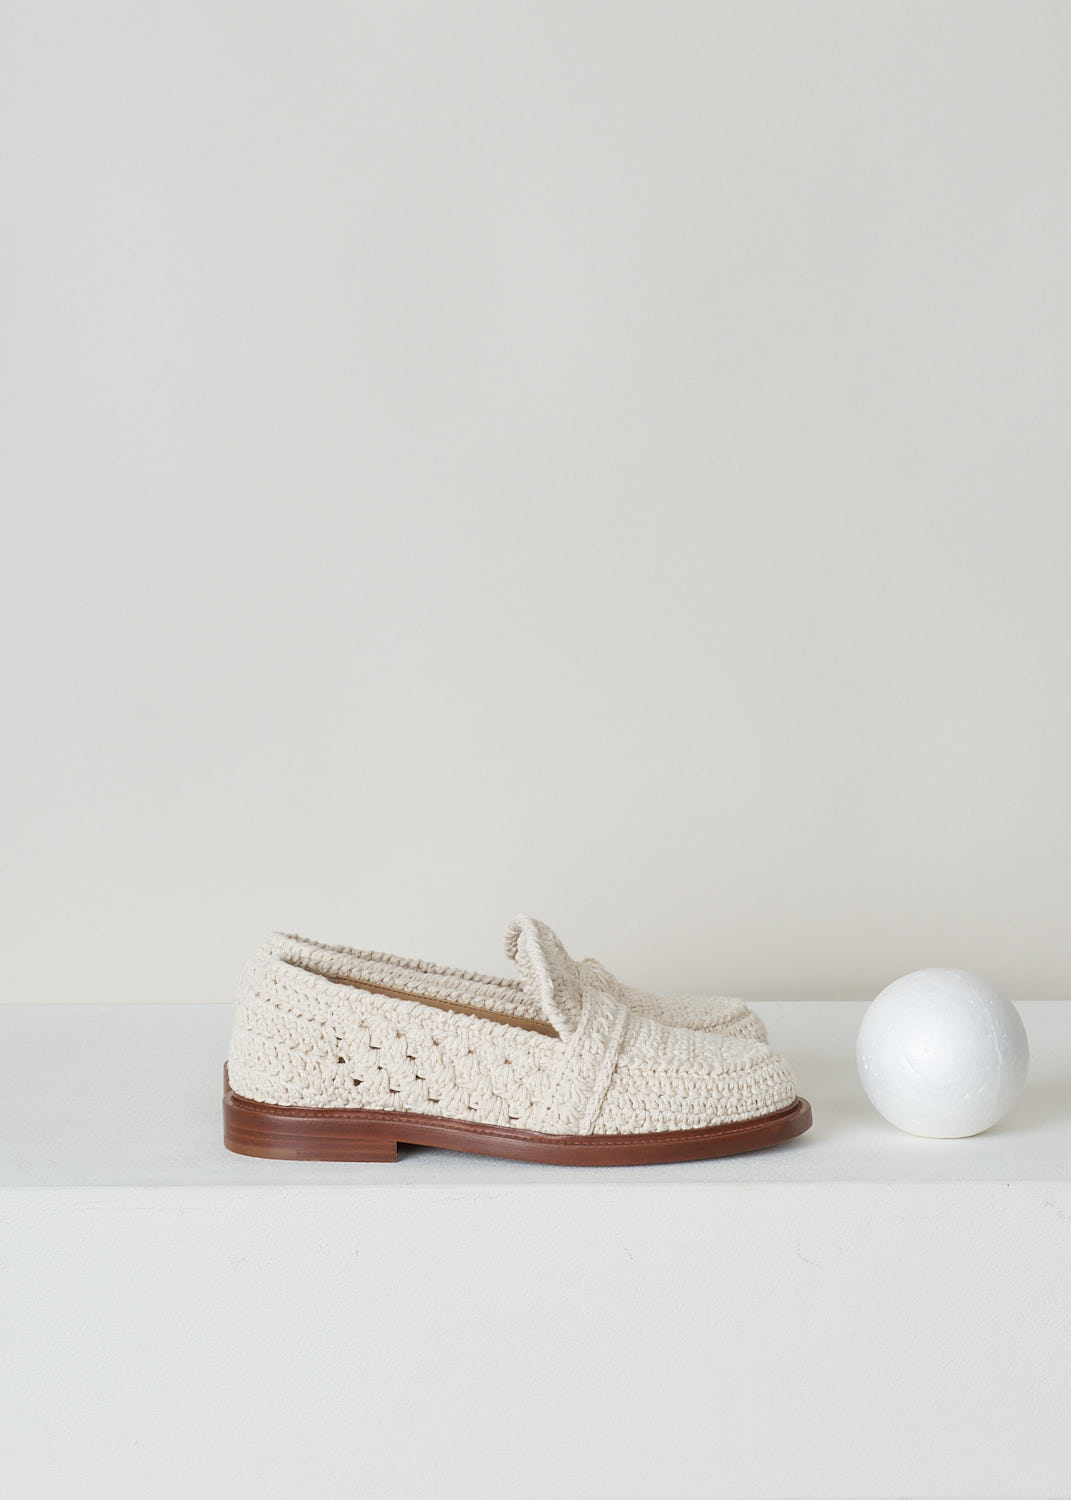 CHLOÃ‰, BEIGE CROCHET LOAFERS, 
CHC22S584X0122_KALYA_FLAT_LOAFERS_122_EGGSHELL, Beige, Side, These beige crochet loafers have a slip-on style with a round toe. The shoes have a sleek brown sole.
